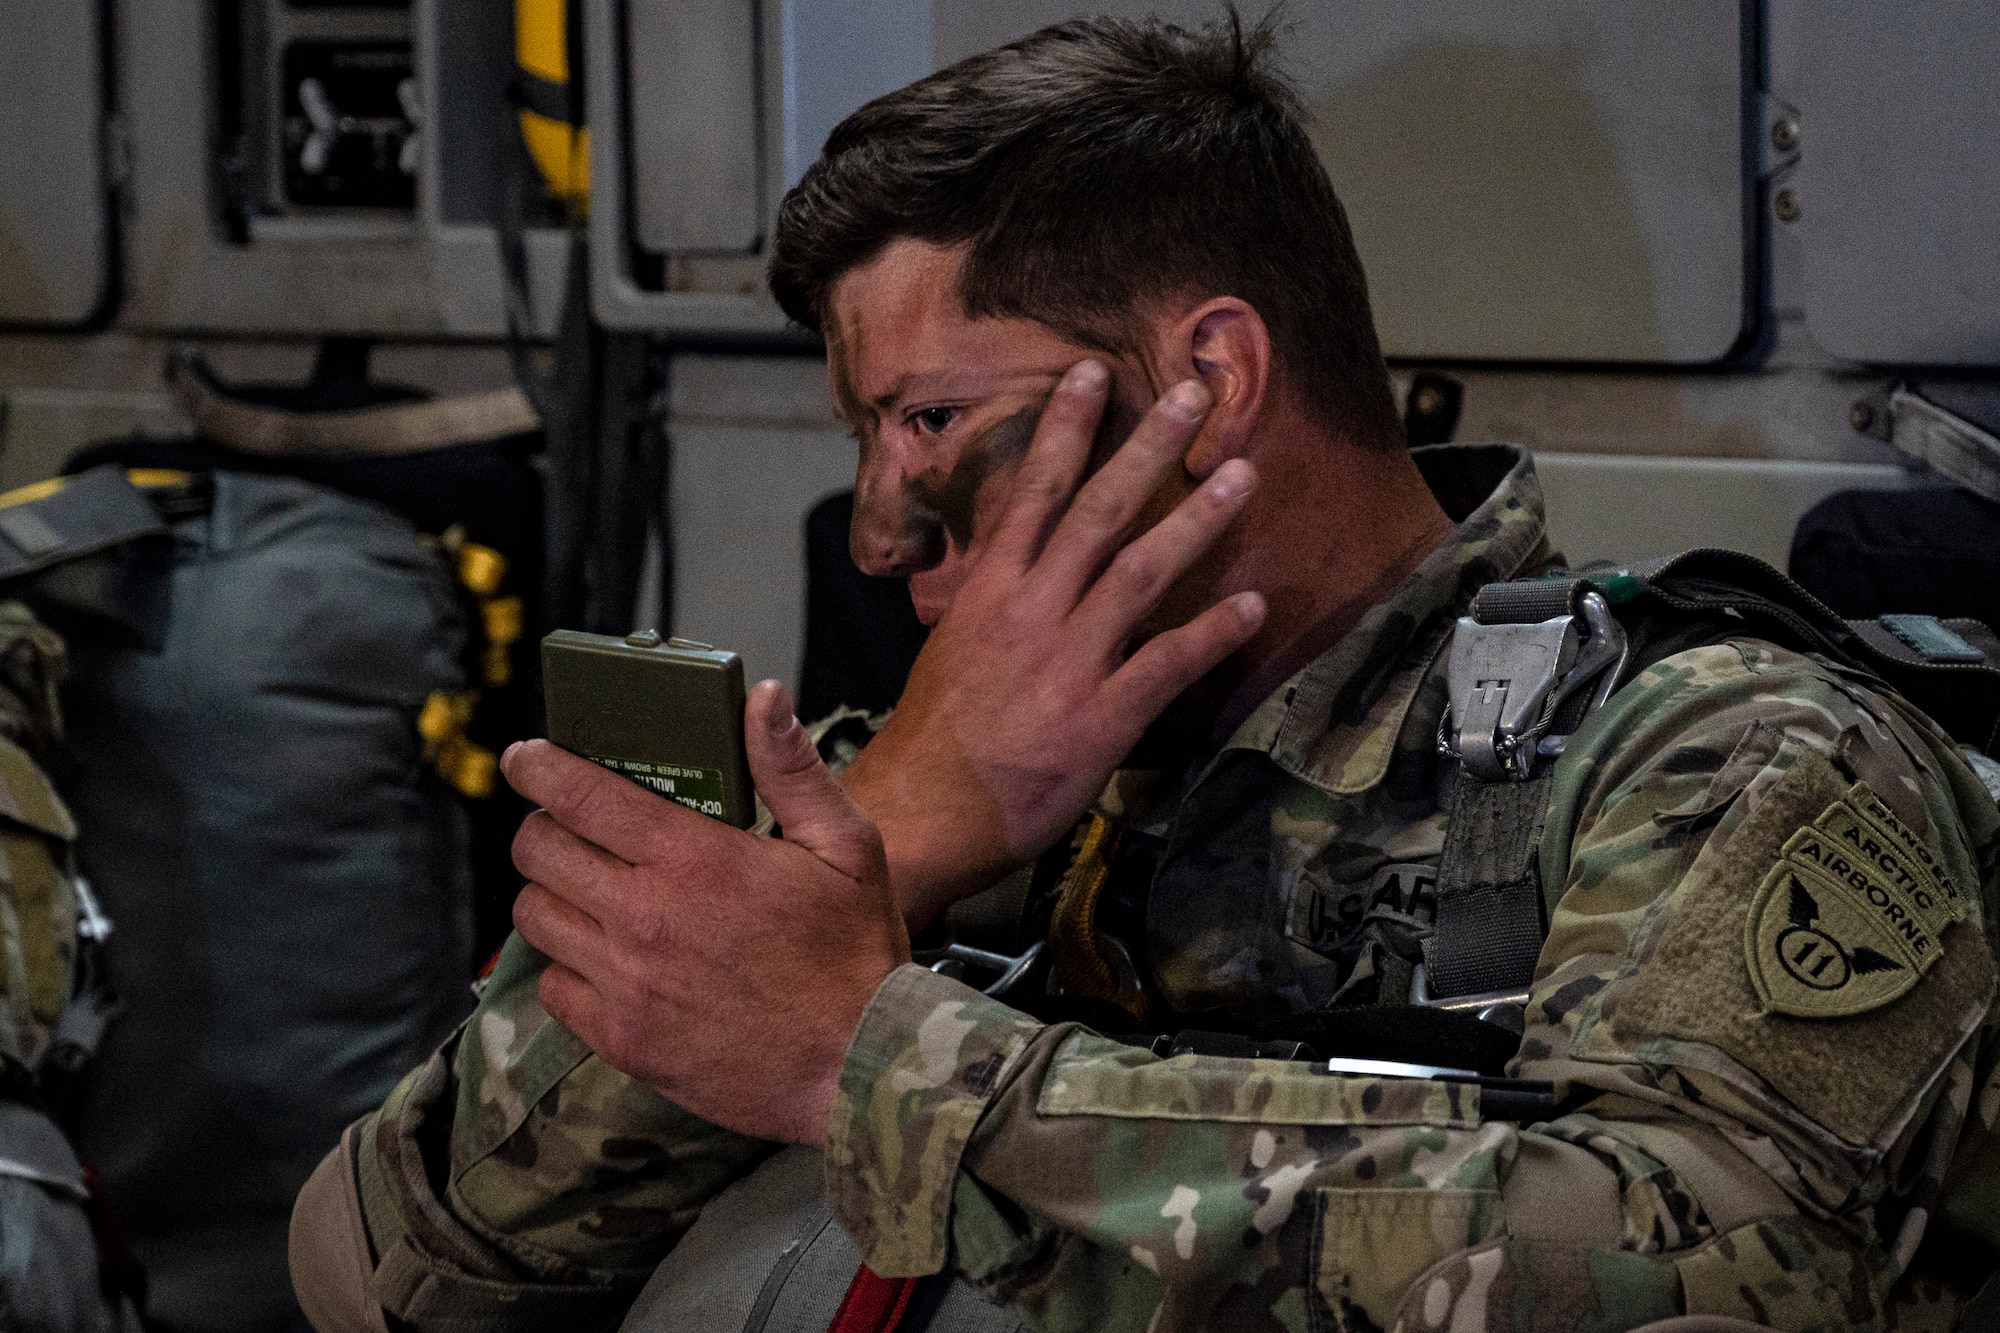 U.S. Army Sgt. 1st Class Charlie Arrendale applies camouflage face paint before jumping out of a C-17 Globemaster III from the 517th Airlift Squadron, Joint Base Elmendorf-Richardson, Alaska during RED FLAG-Alaska 22-2 on June 15, 2022. RF-A provides realistic combat training by integrating joint, coalition and multilateral forces into simulated forward operating bases. Arrendale is assigned to the 3rd Battalion, 509th Infantry Regiment, 2nd Infantry Brigade Combat Team (Airborne), 11th Airborne Division. (U.S. Air Force photo by Sheila deVera)